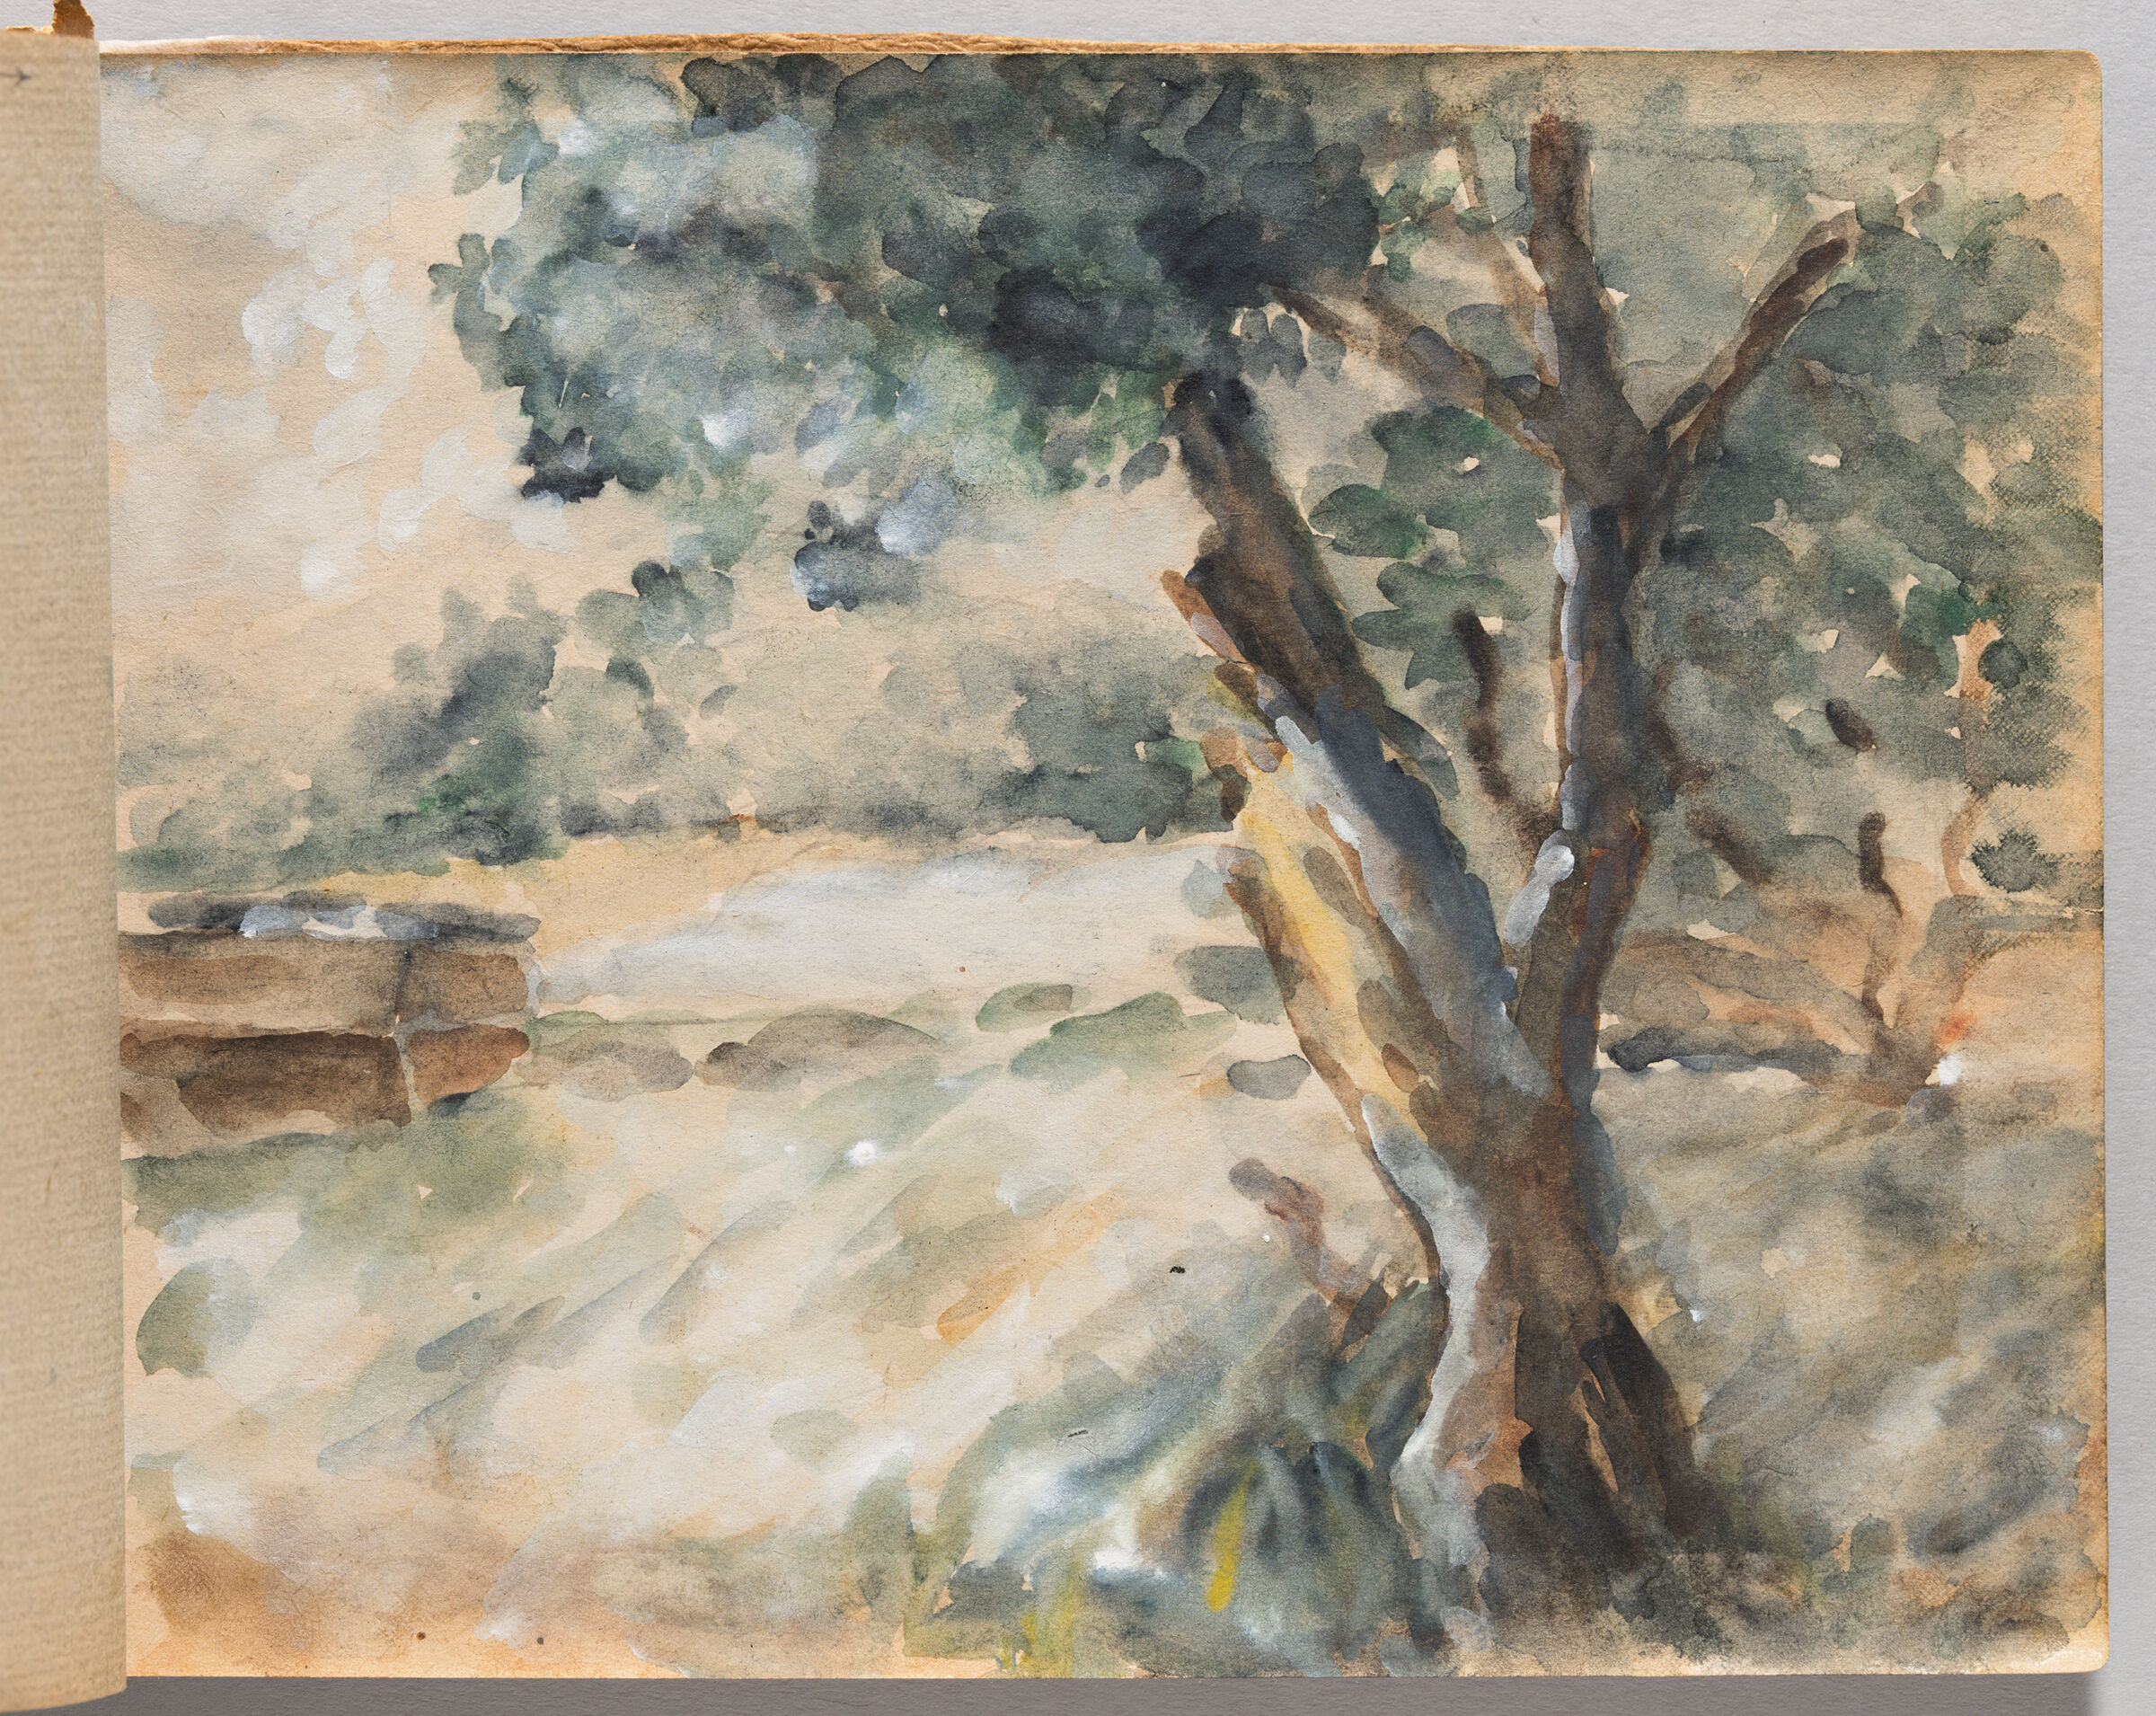 Untitled (Blank With Watercolor Stains, Left Page); Untitled (Landscape, Right Page)
